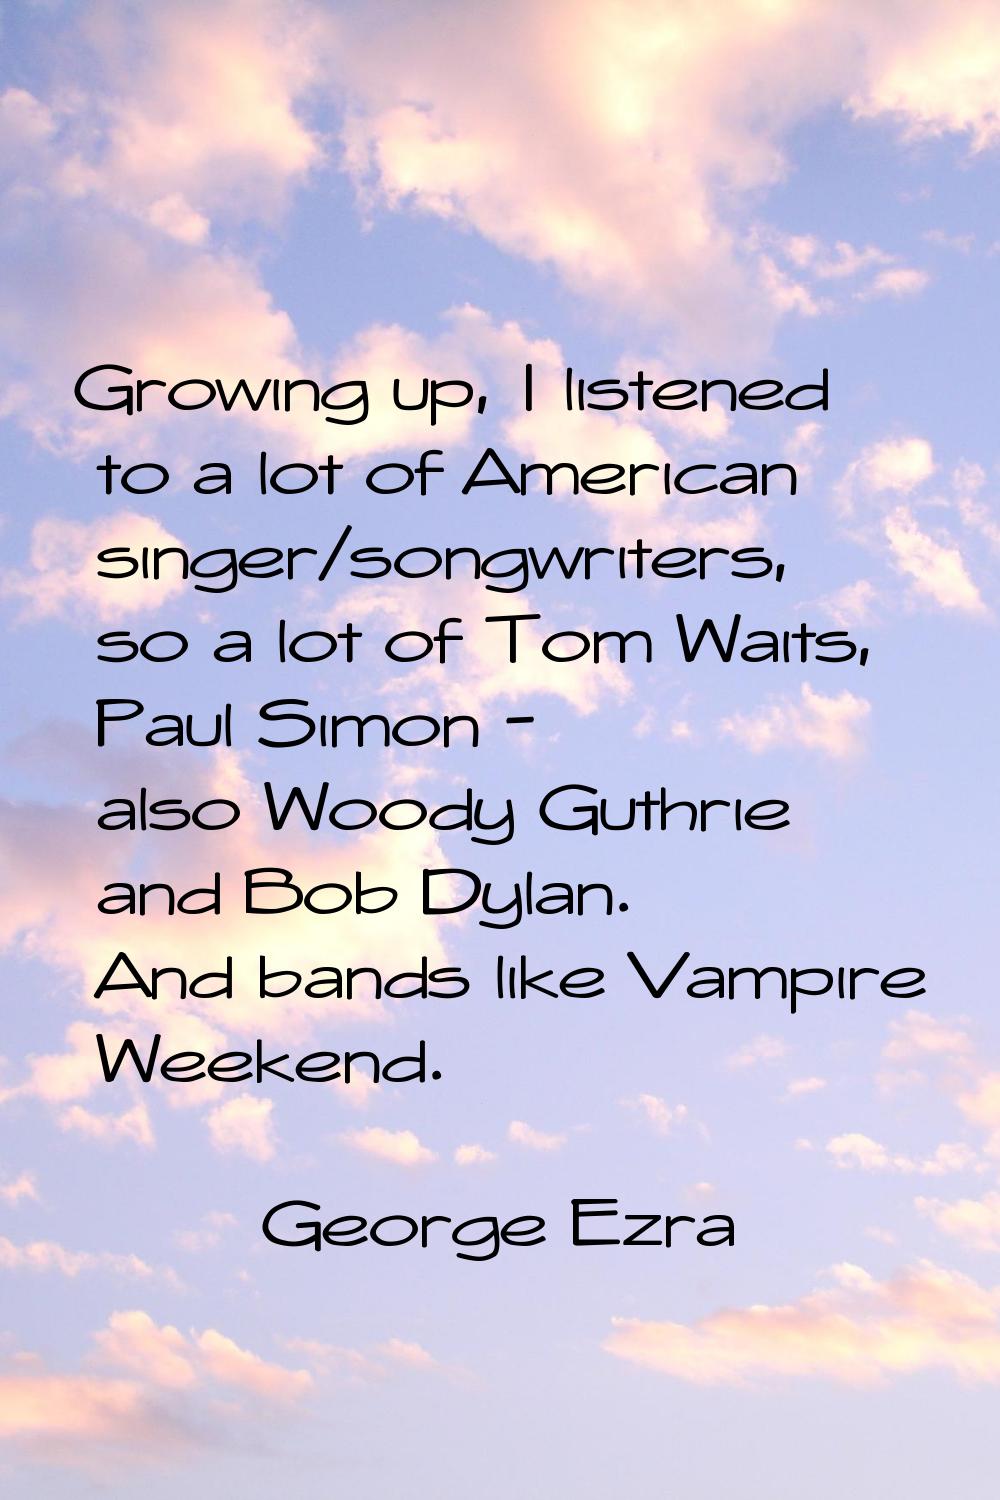 Growing up, I listened to a lot of American singer/songwriters, so a lot of Tom Waits, Paul Simon -